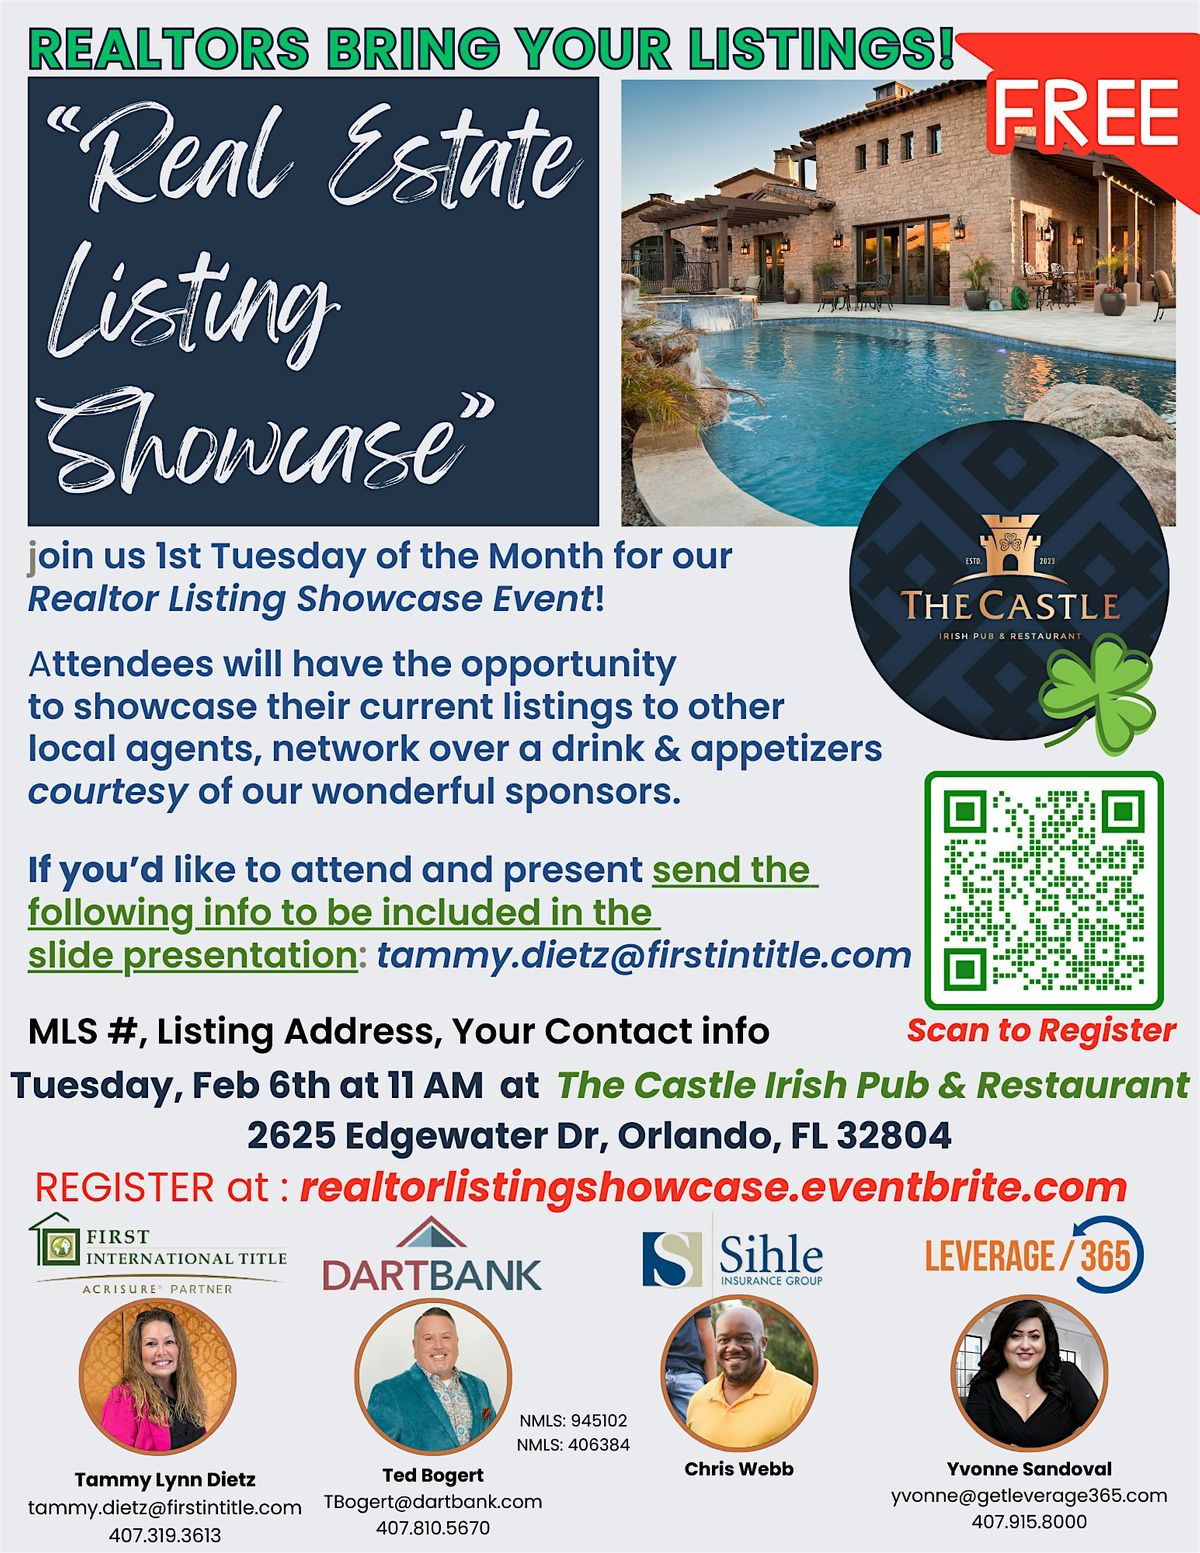 Realtor Listing Showcase - Share Your Listings with Local Agents FREE EVENT